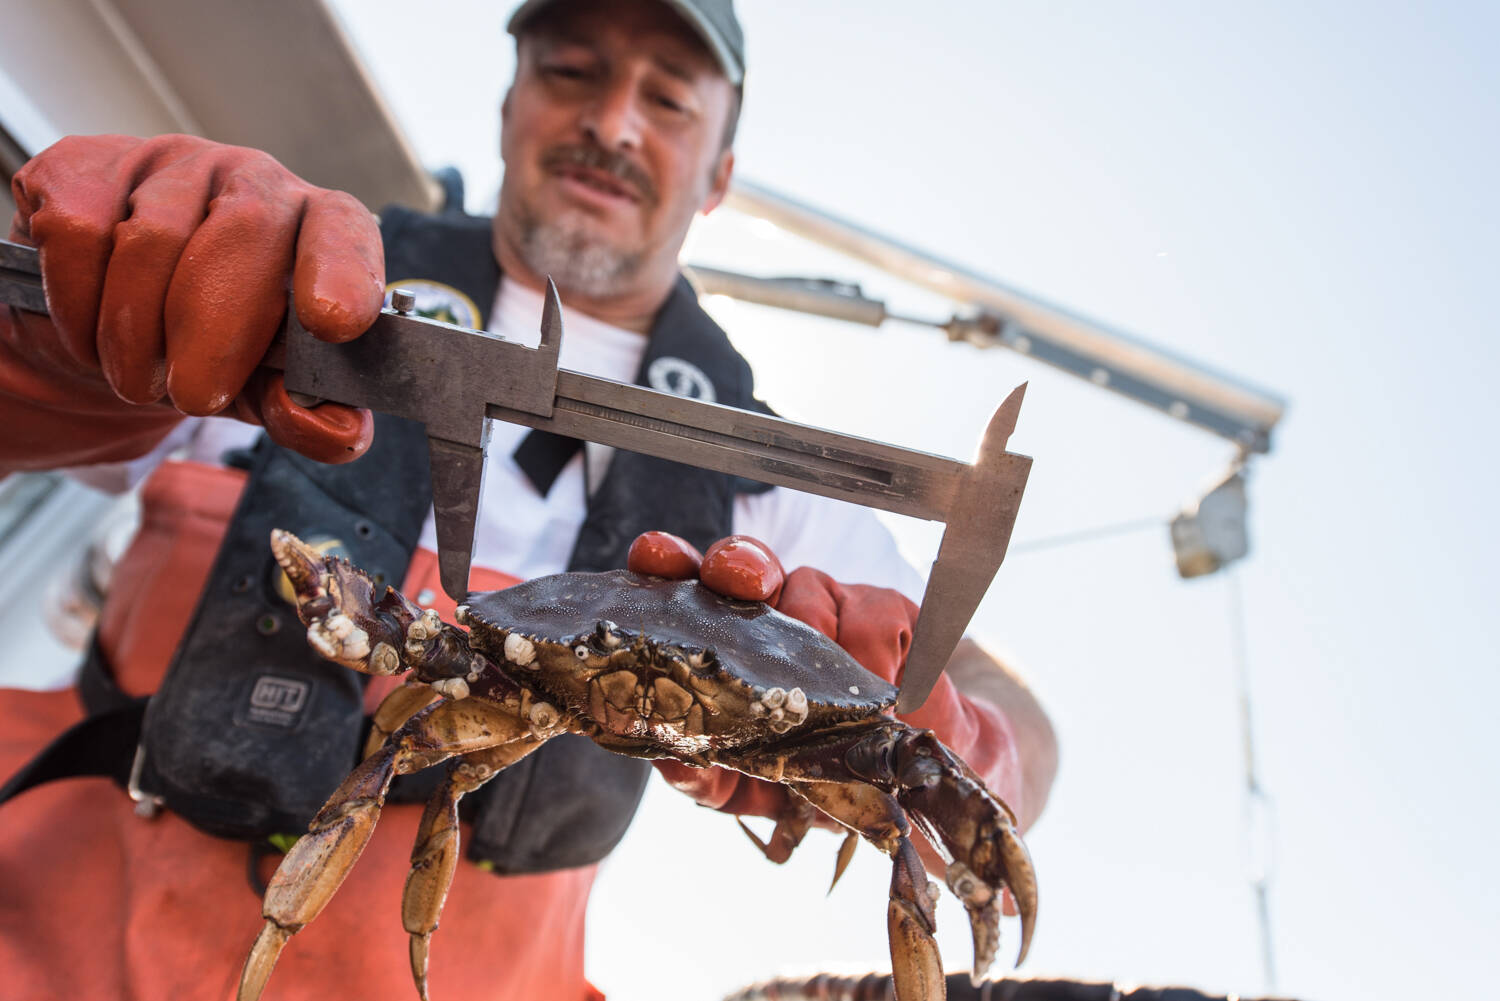 Austin Trigg / NMFS
Dungeness crab is a valuable fishery resource that is culturally and economically important to West Coast communities.